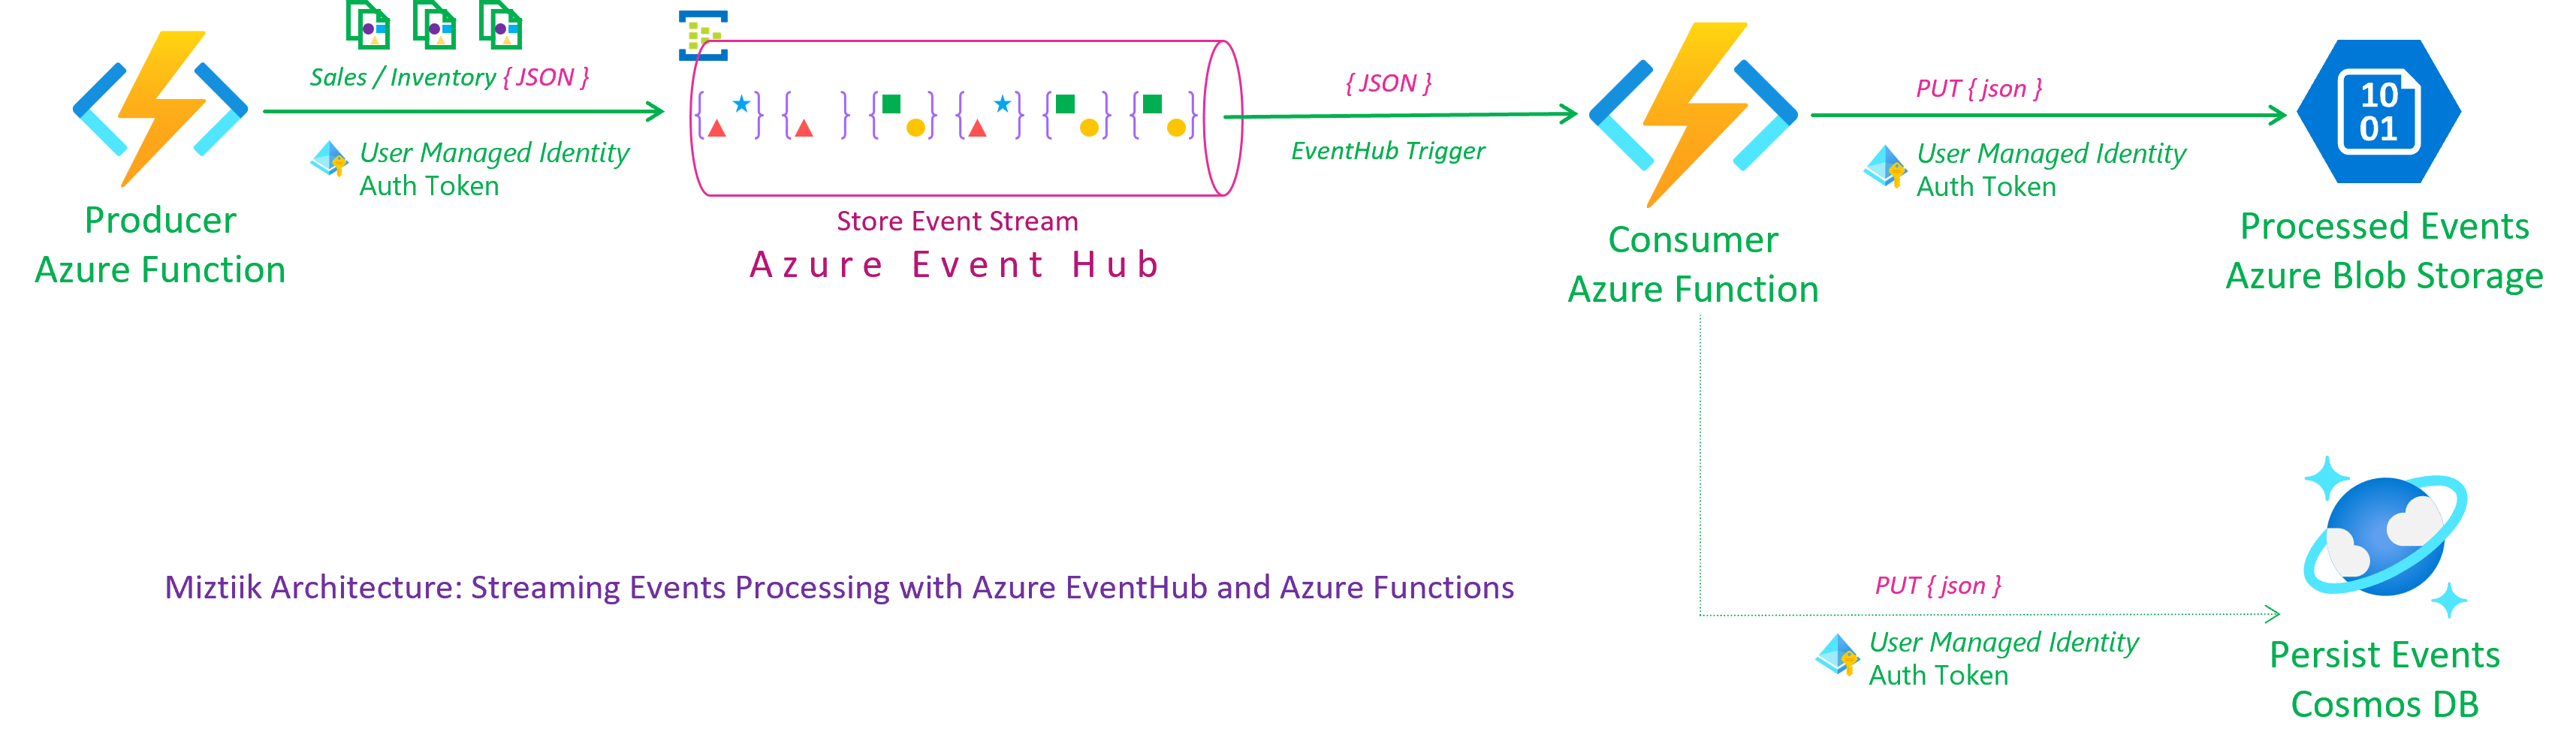 Miztiik Automation - Event Streaming with Azure Event Hub